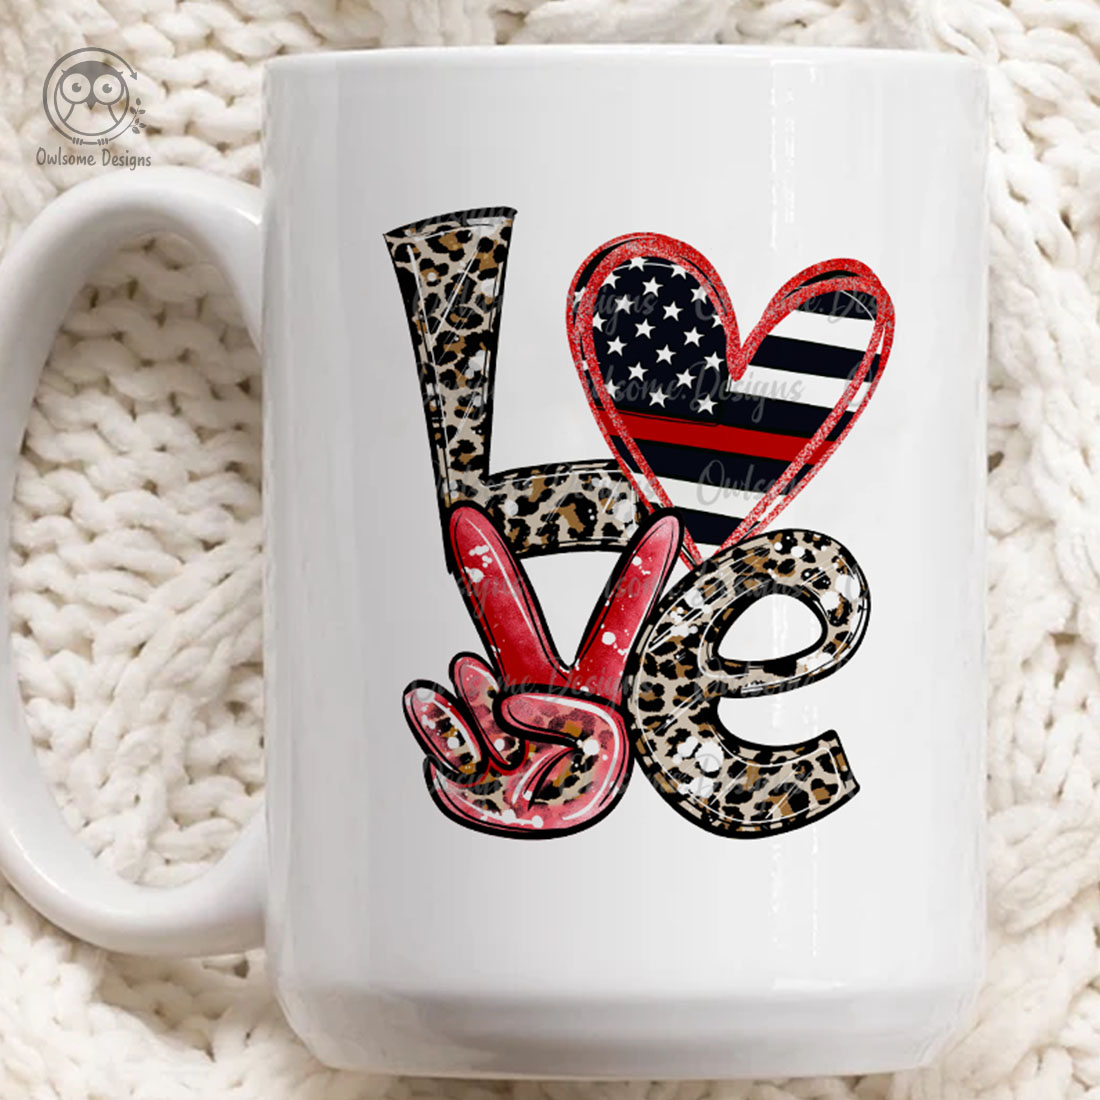 The image of a cup with a beautiful inscription love with the American flag.